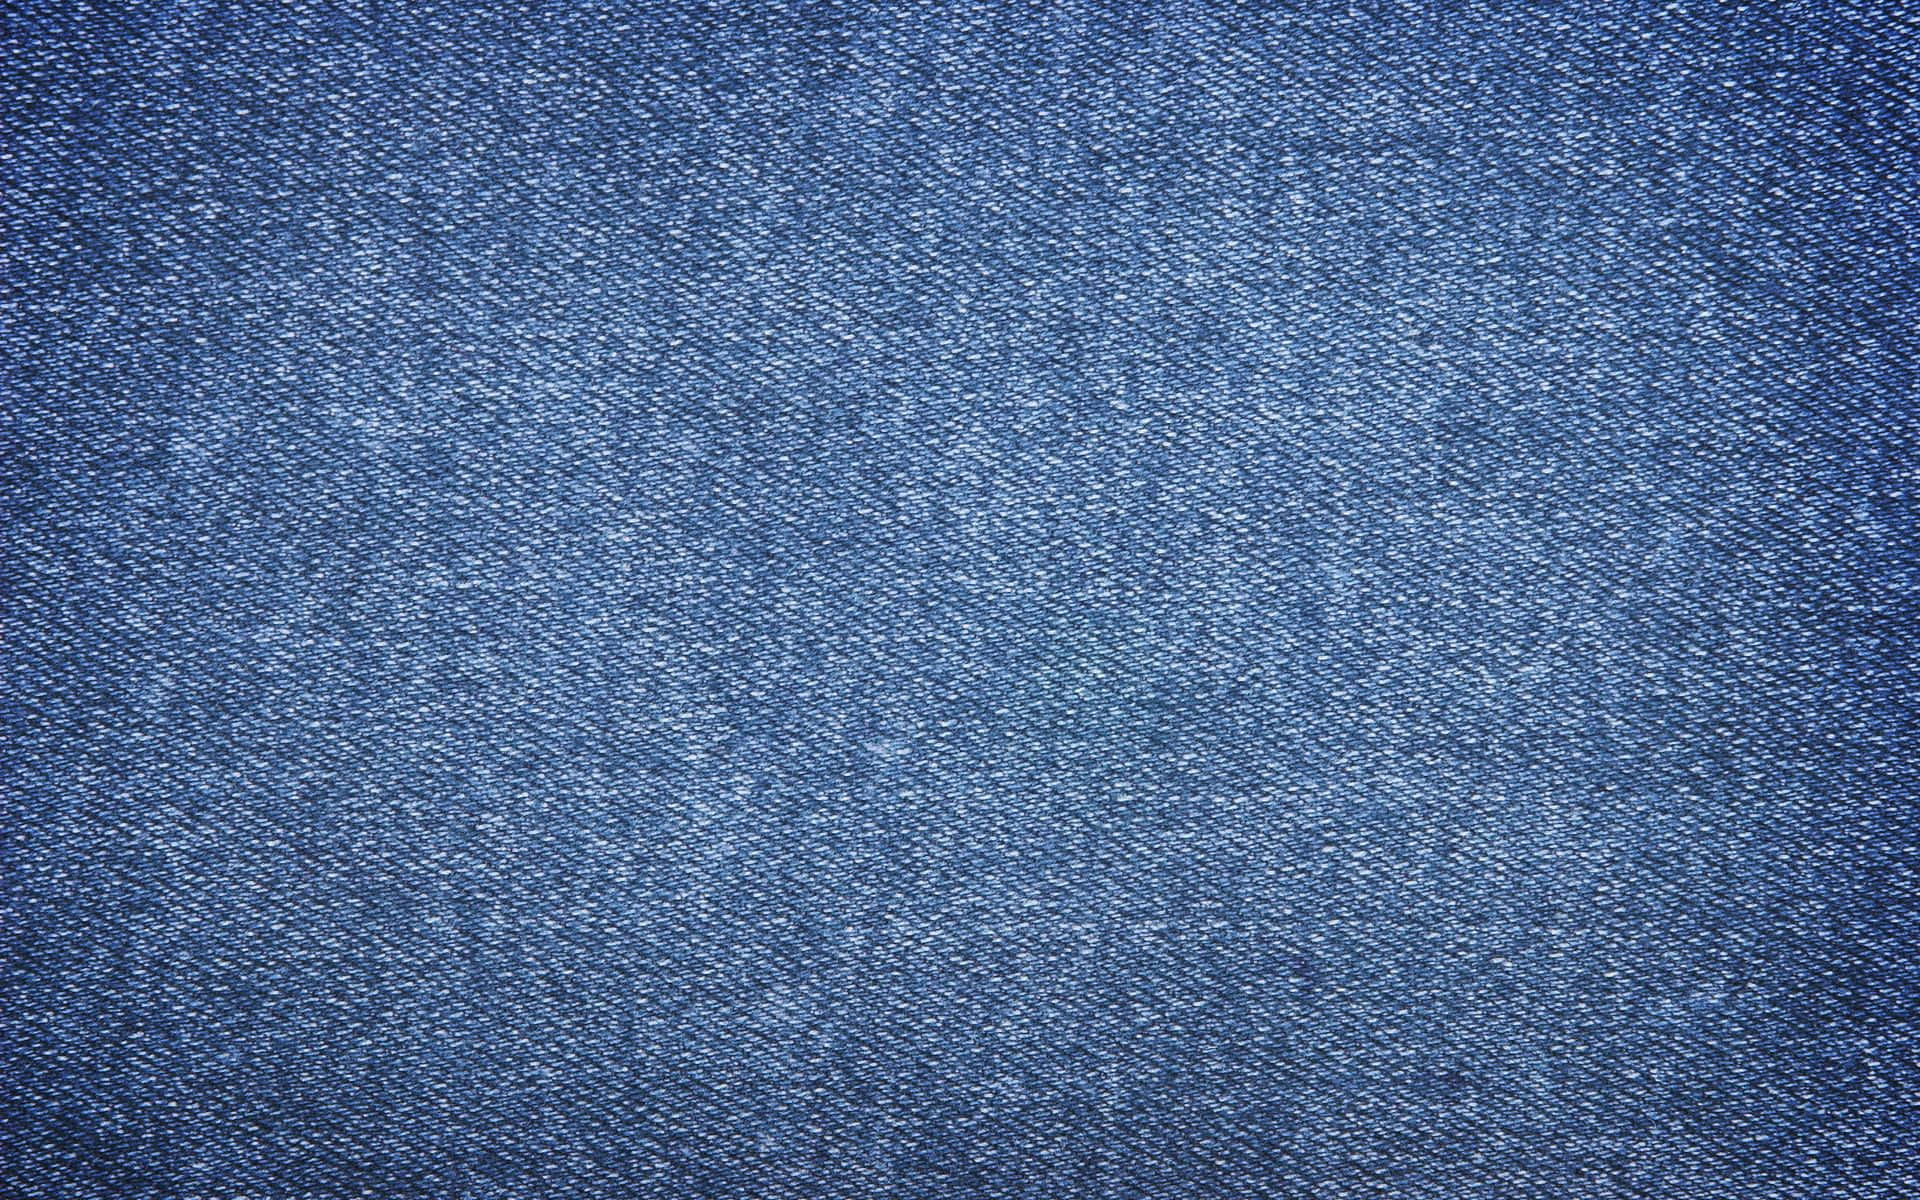 Blue Jeans Texture Abstract Pattern on Blue Jean Background Canvas Denim  Texture Material Background Dark Backgrounds Stock Image  Image of  casual jeans 151875145